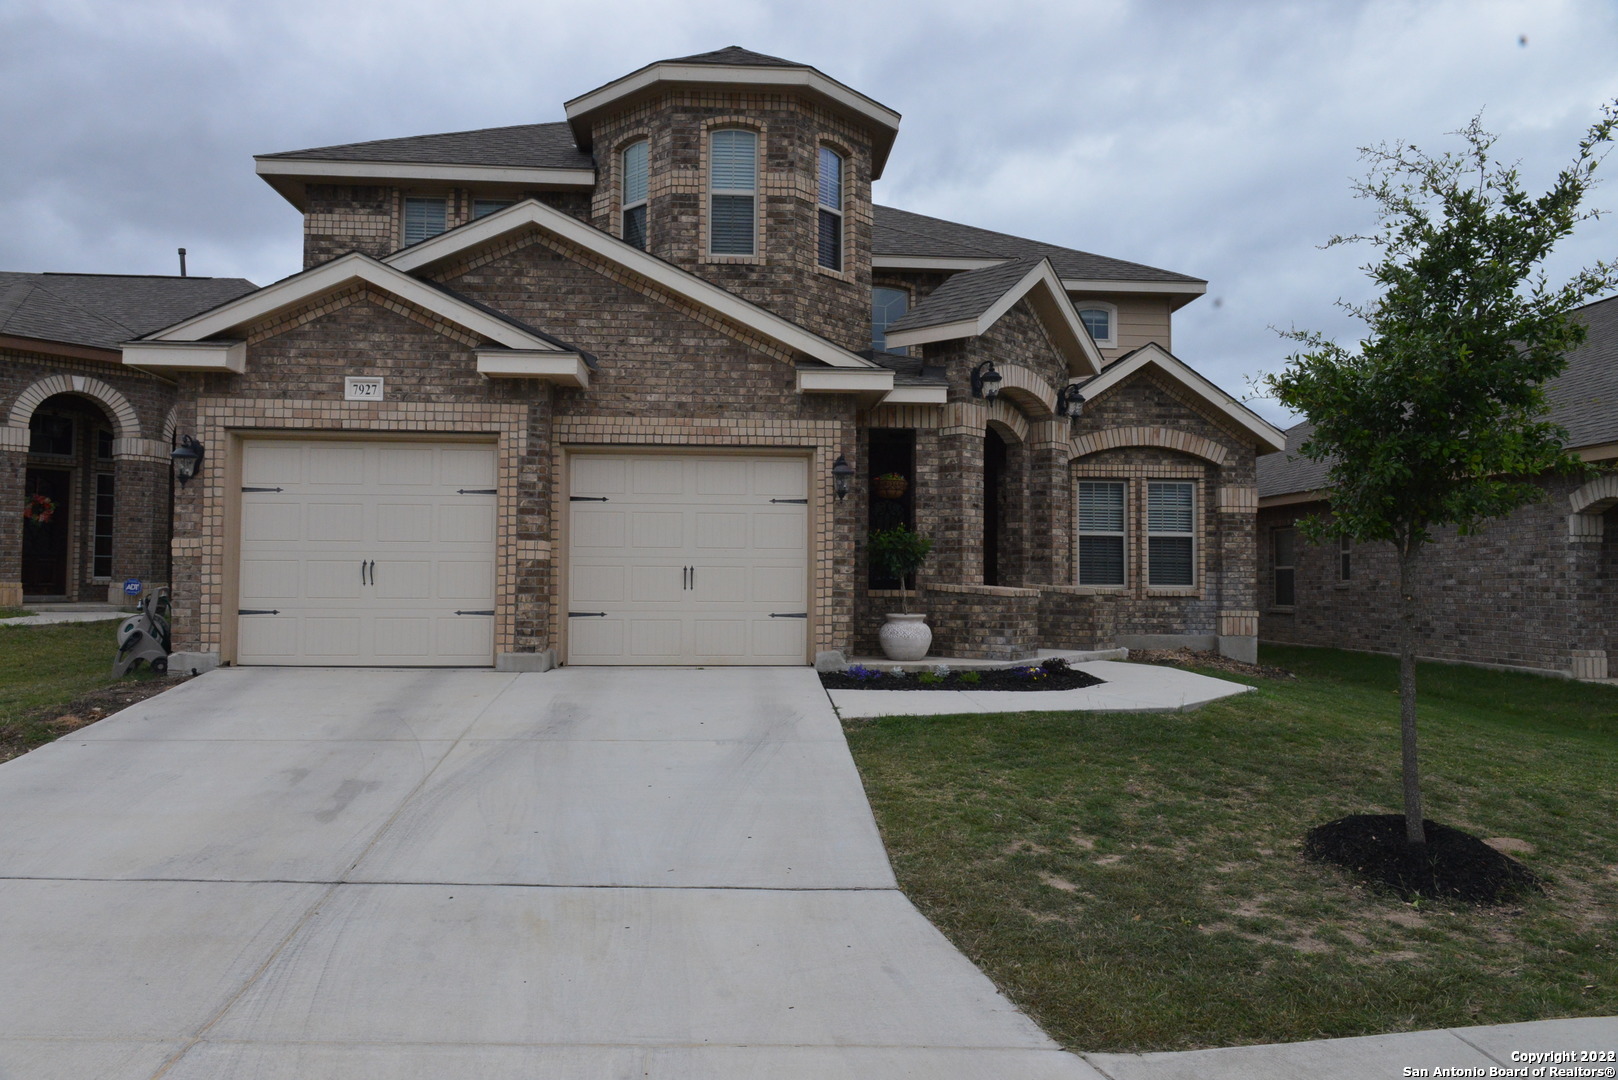 6 minutes from Government Canyon, 10 minute access to San Antonio's major thoroughfares, and in one of the cities top school districts, sits this 4 bedroom, 3 full bath, 2976 square foot mini-palace.  Take a drive through the popular community of Stillwater Ranch, and feast your eyes on extravagent custom detail through out this entire home.  From the outside in, you will find art niches, arched entryways, tray ceilings, crown moulding, bay windows, large spaces, and details that make this home anything BUT cookie cutter.  Owner's suite and guest bedroom located on first floor, loft and secondary bedrooms on second floor.